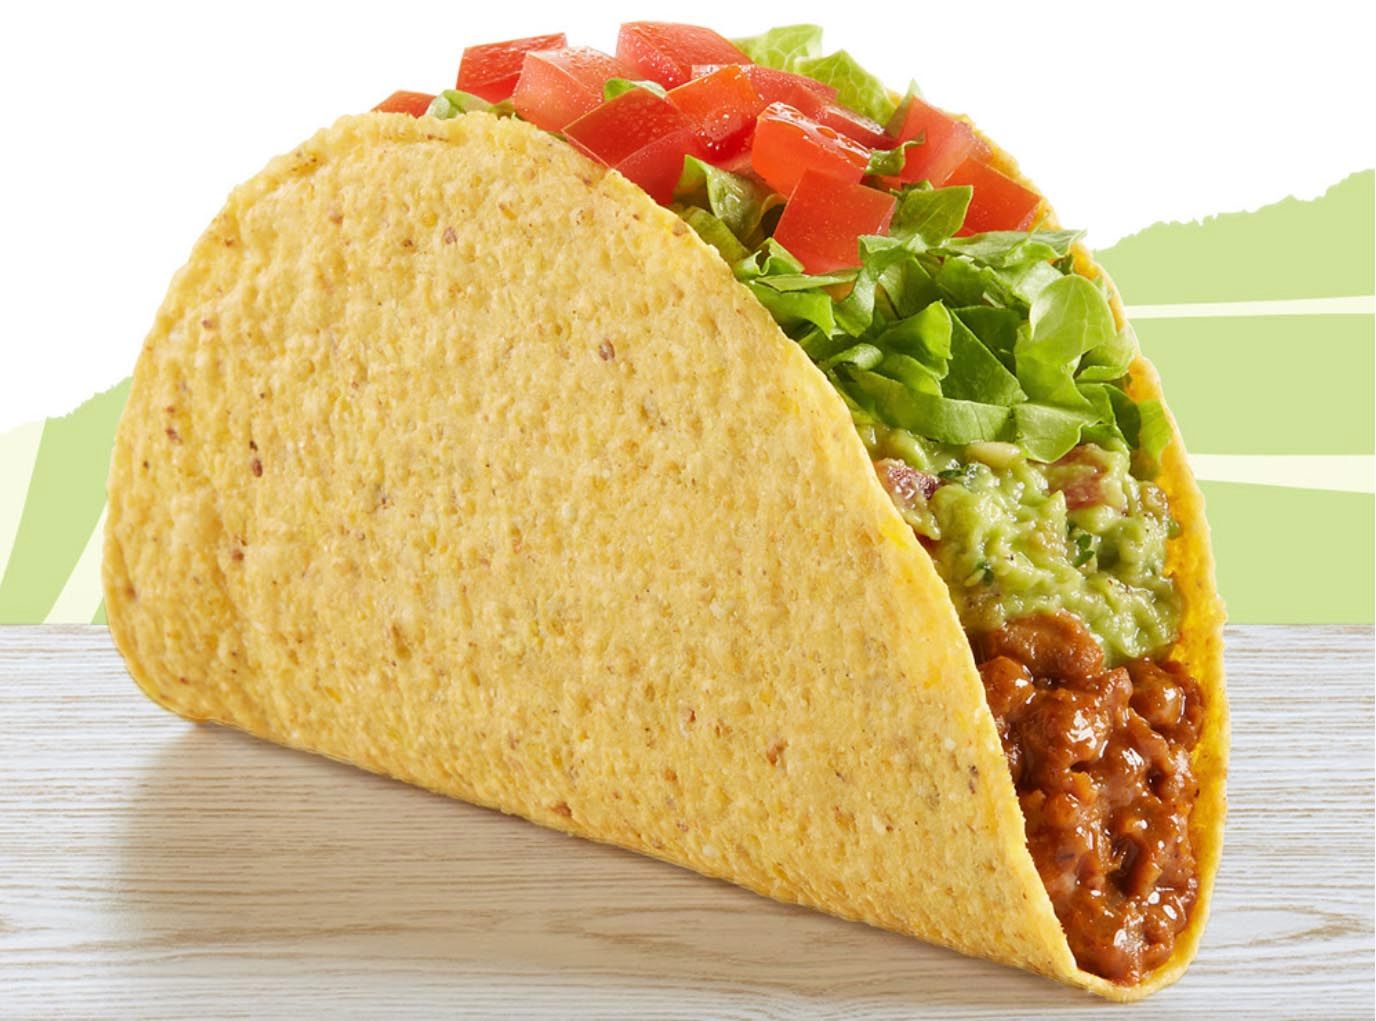 Claim a Free Beyond Guacamole Taco at Del Taco with a Qualifying Beyond Meat Purchase Through DoorDash